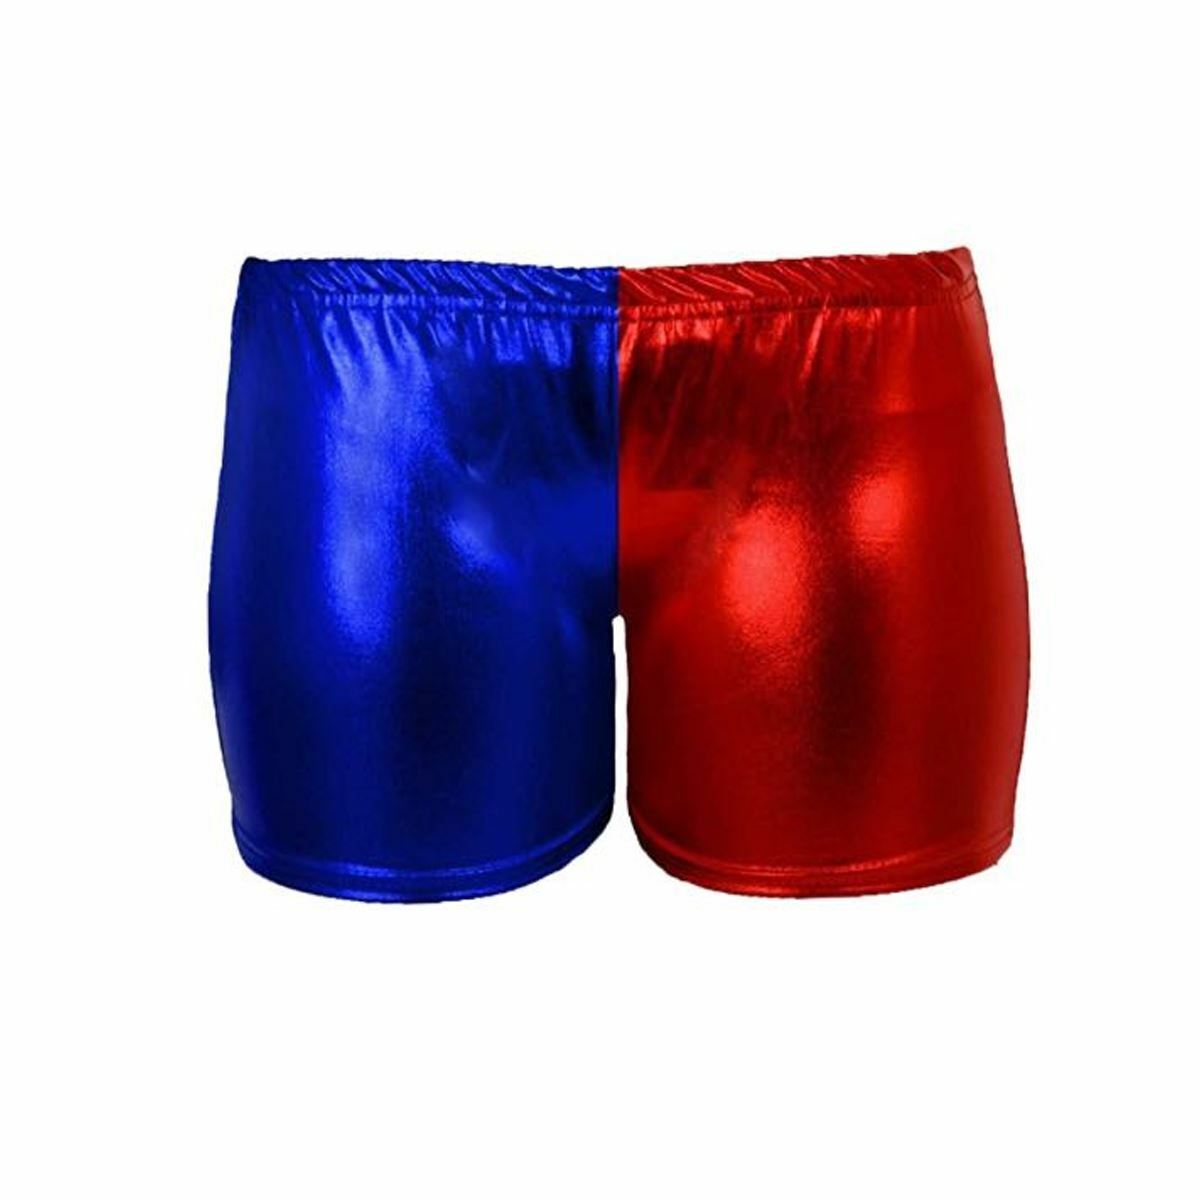 Adult "Harley Quinn" Inspired Hot Pants. Sizes 8-18.